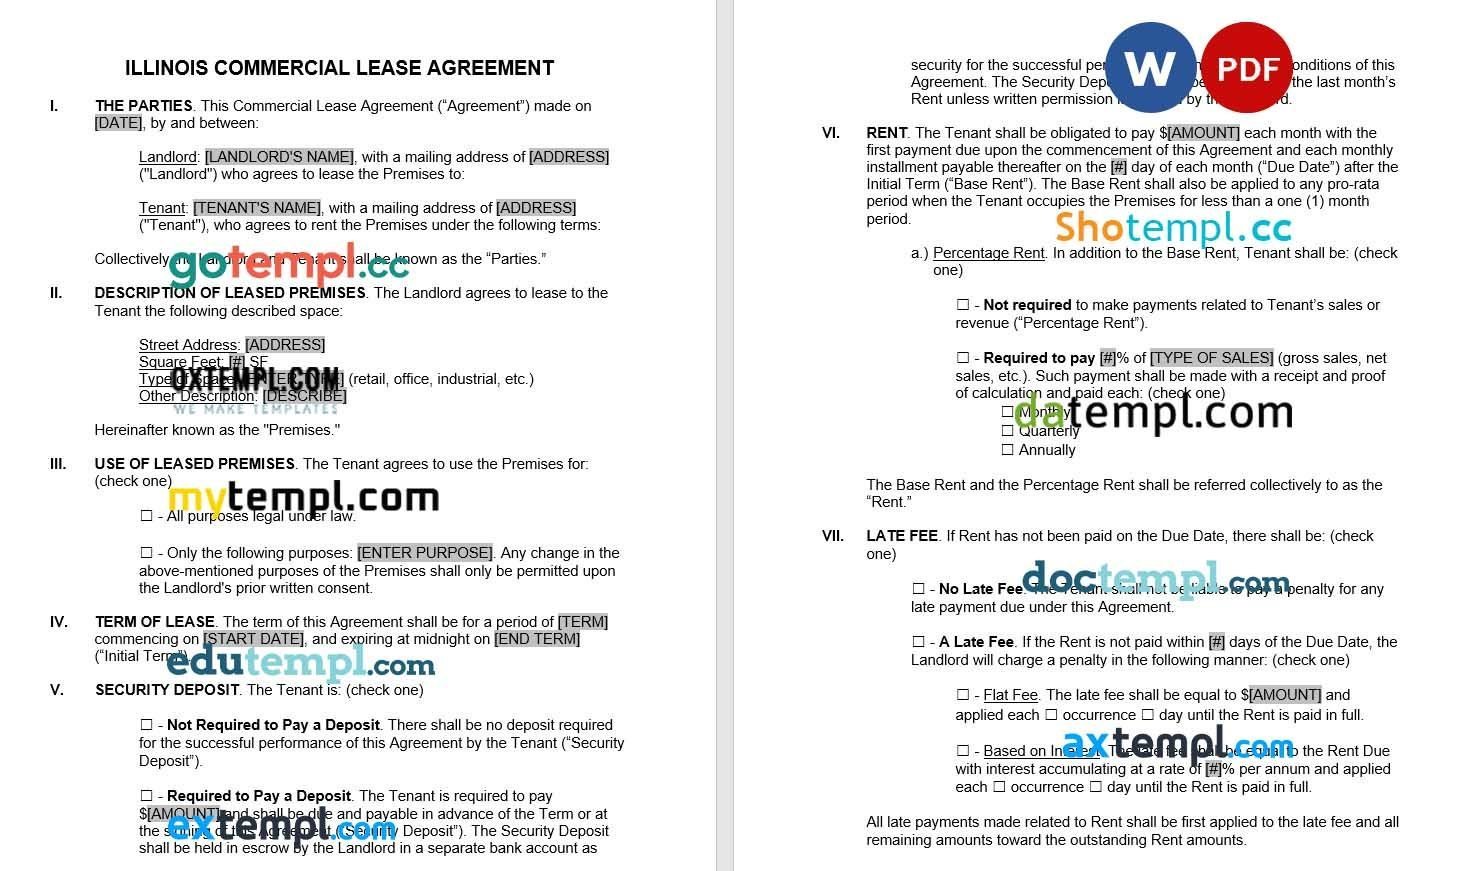 Illinois Commercial Lease Agreement Word example, fully editable